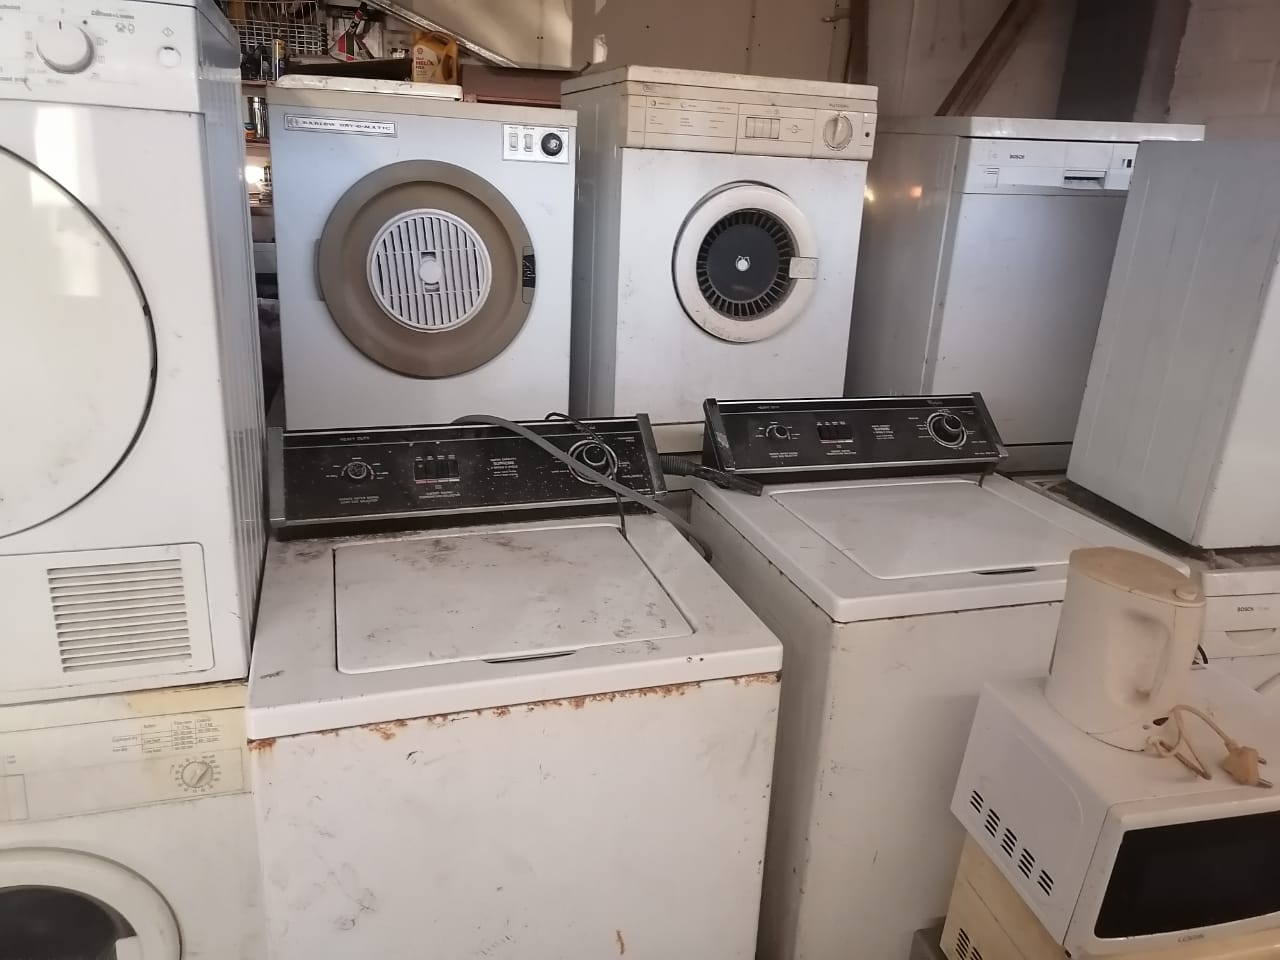 hi wecollect allbroken appliances for free , we clear out your storage units